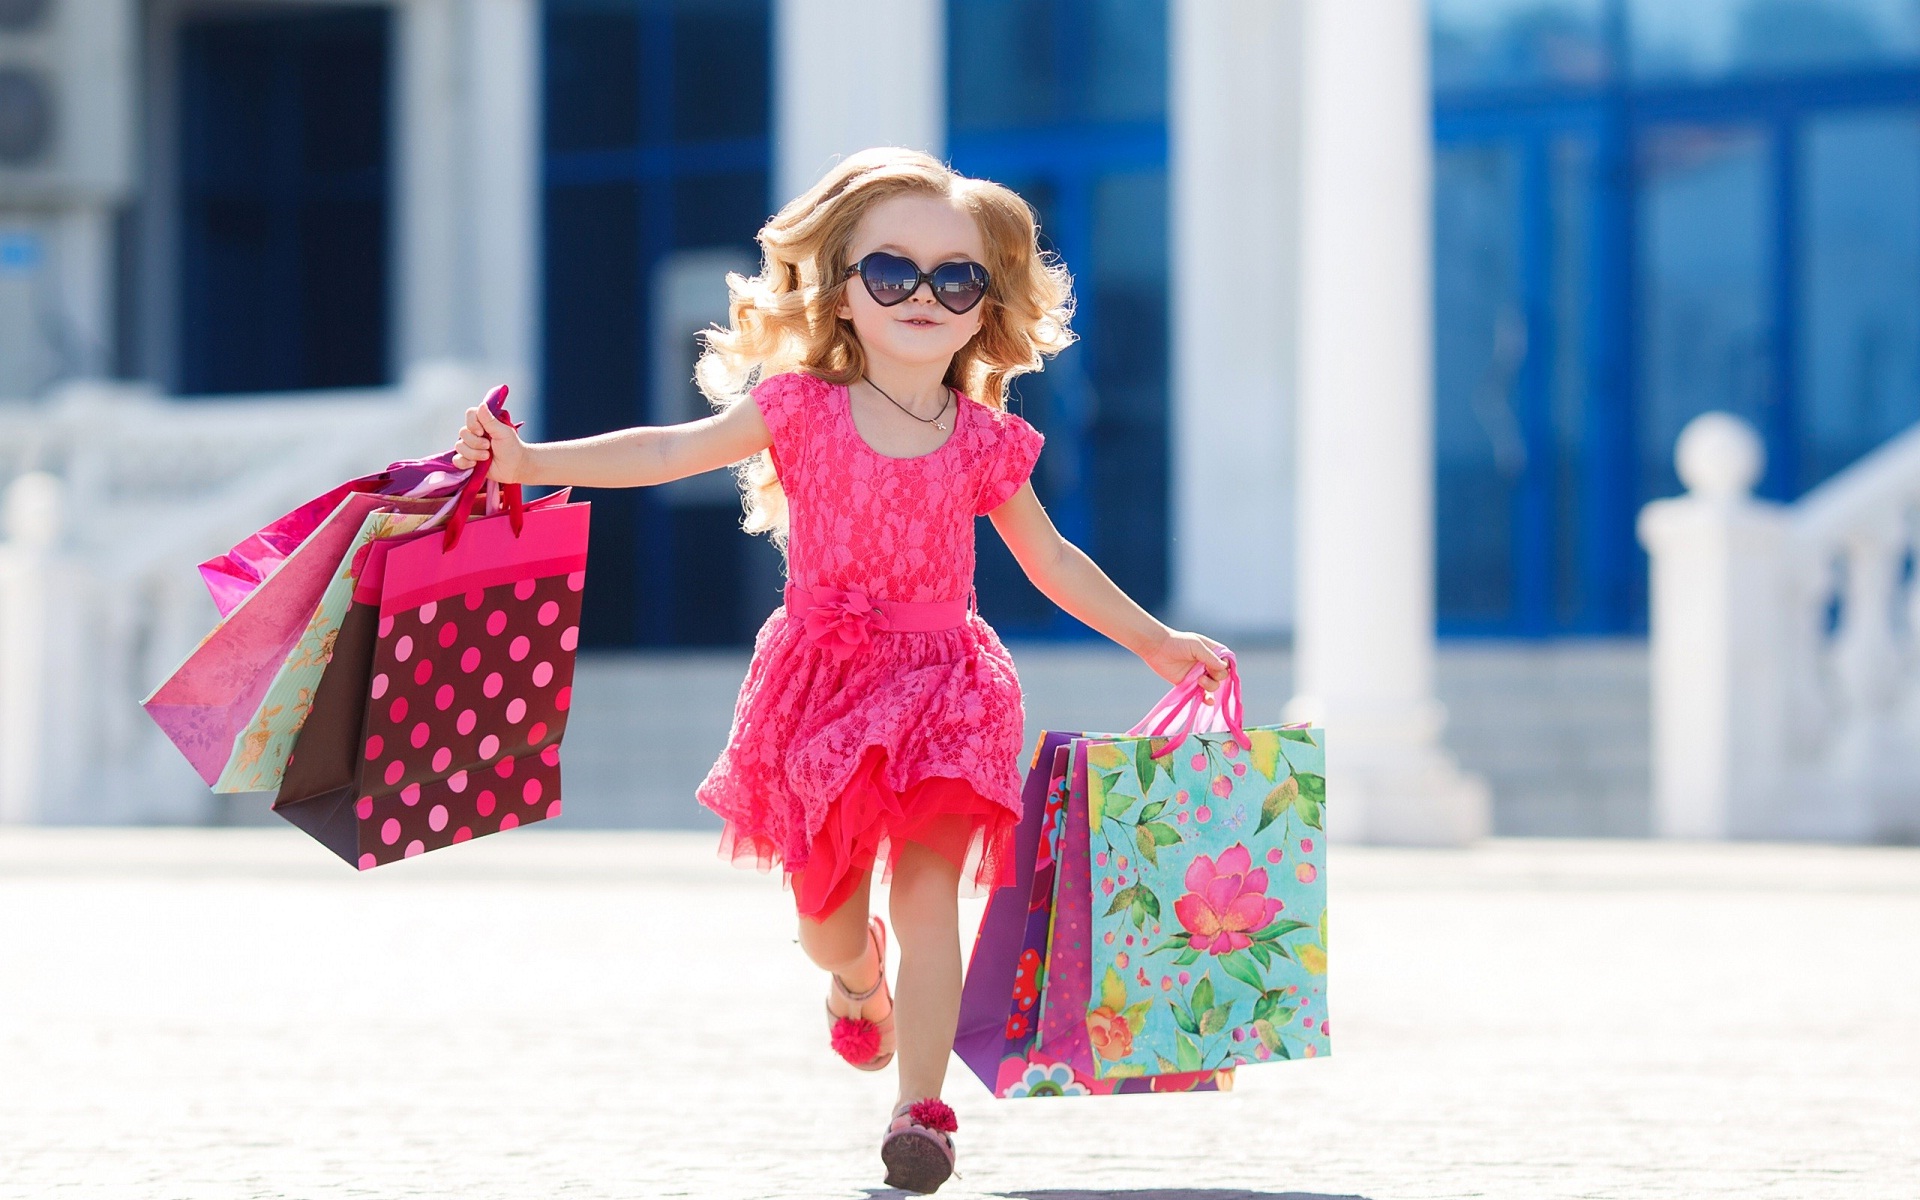 Stylish cute girl shopping time wallpapers | HD Wallpapers Rocks